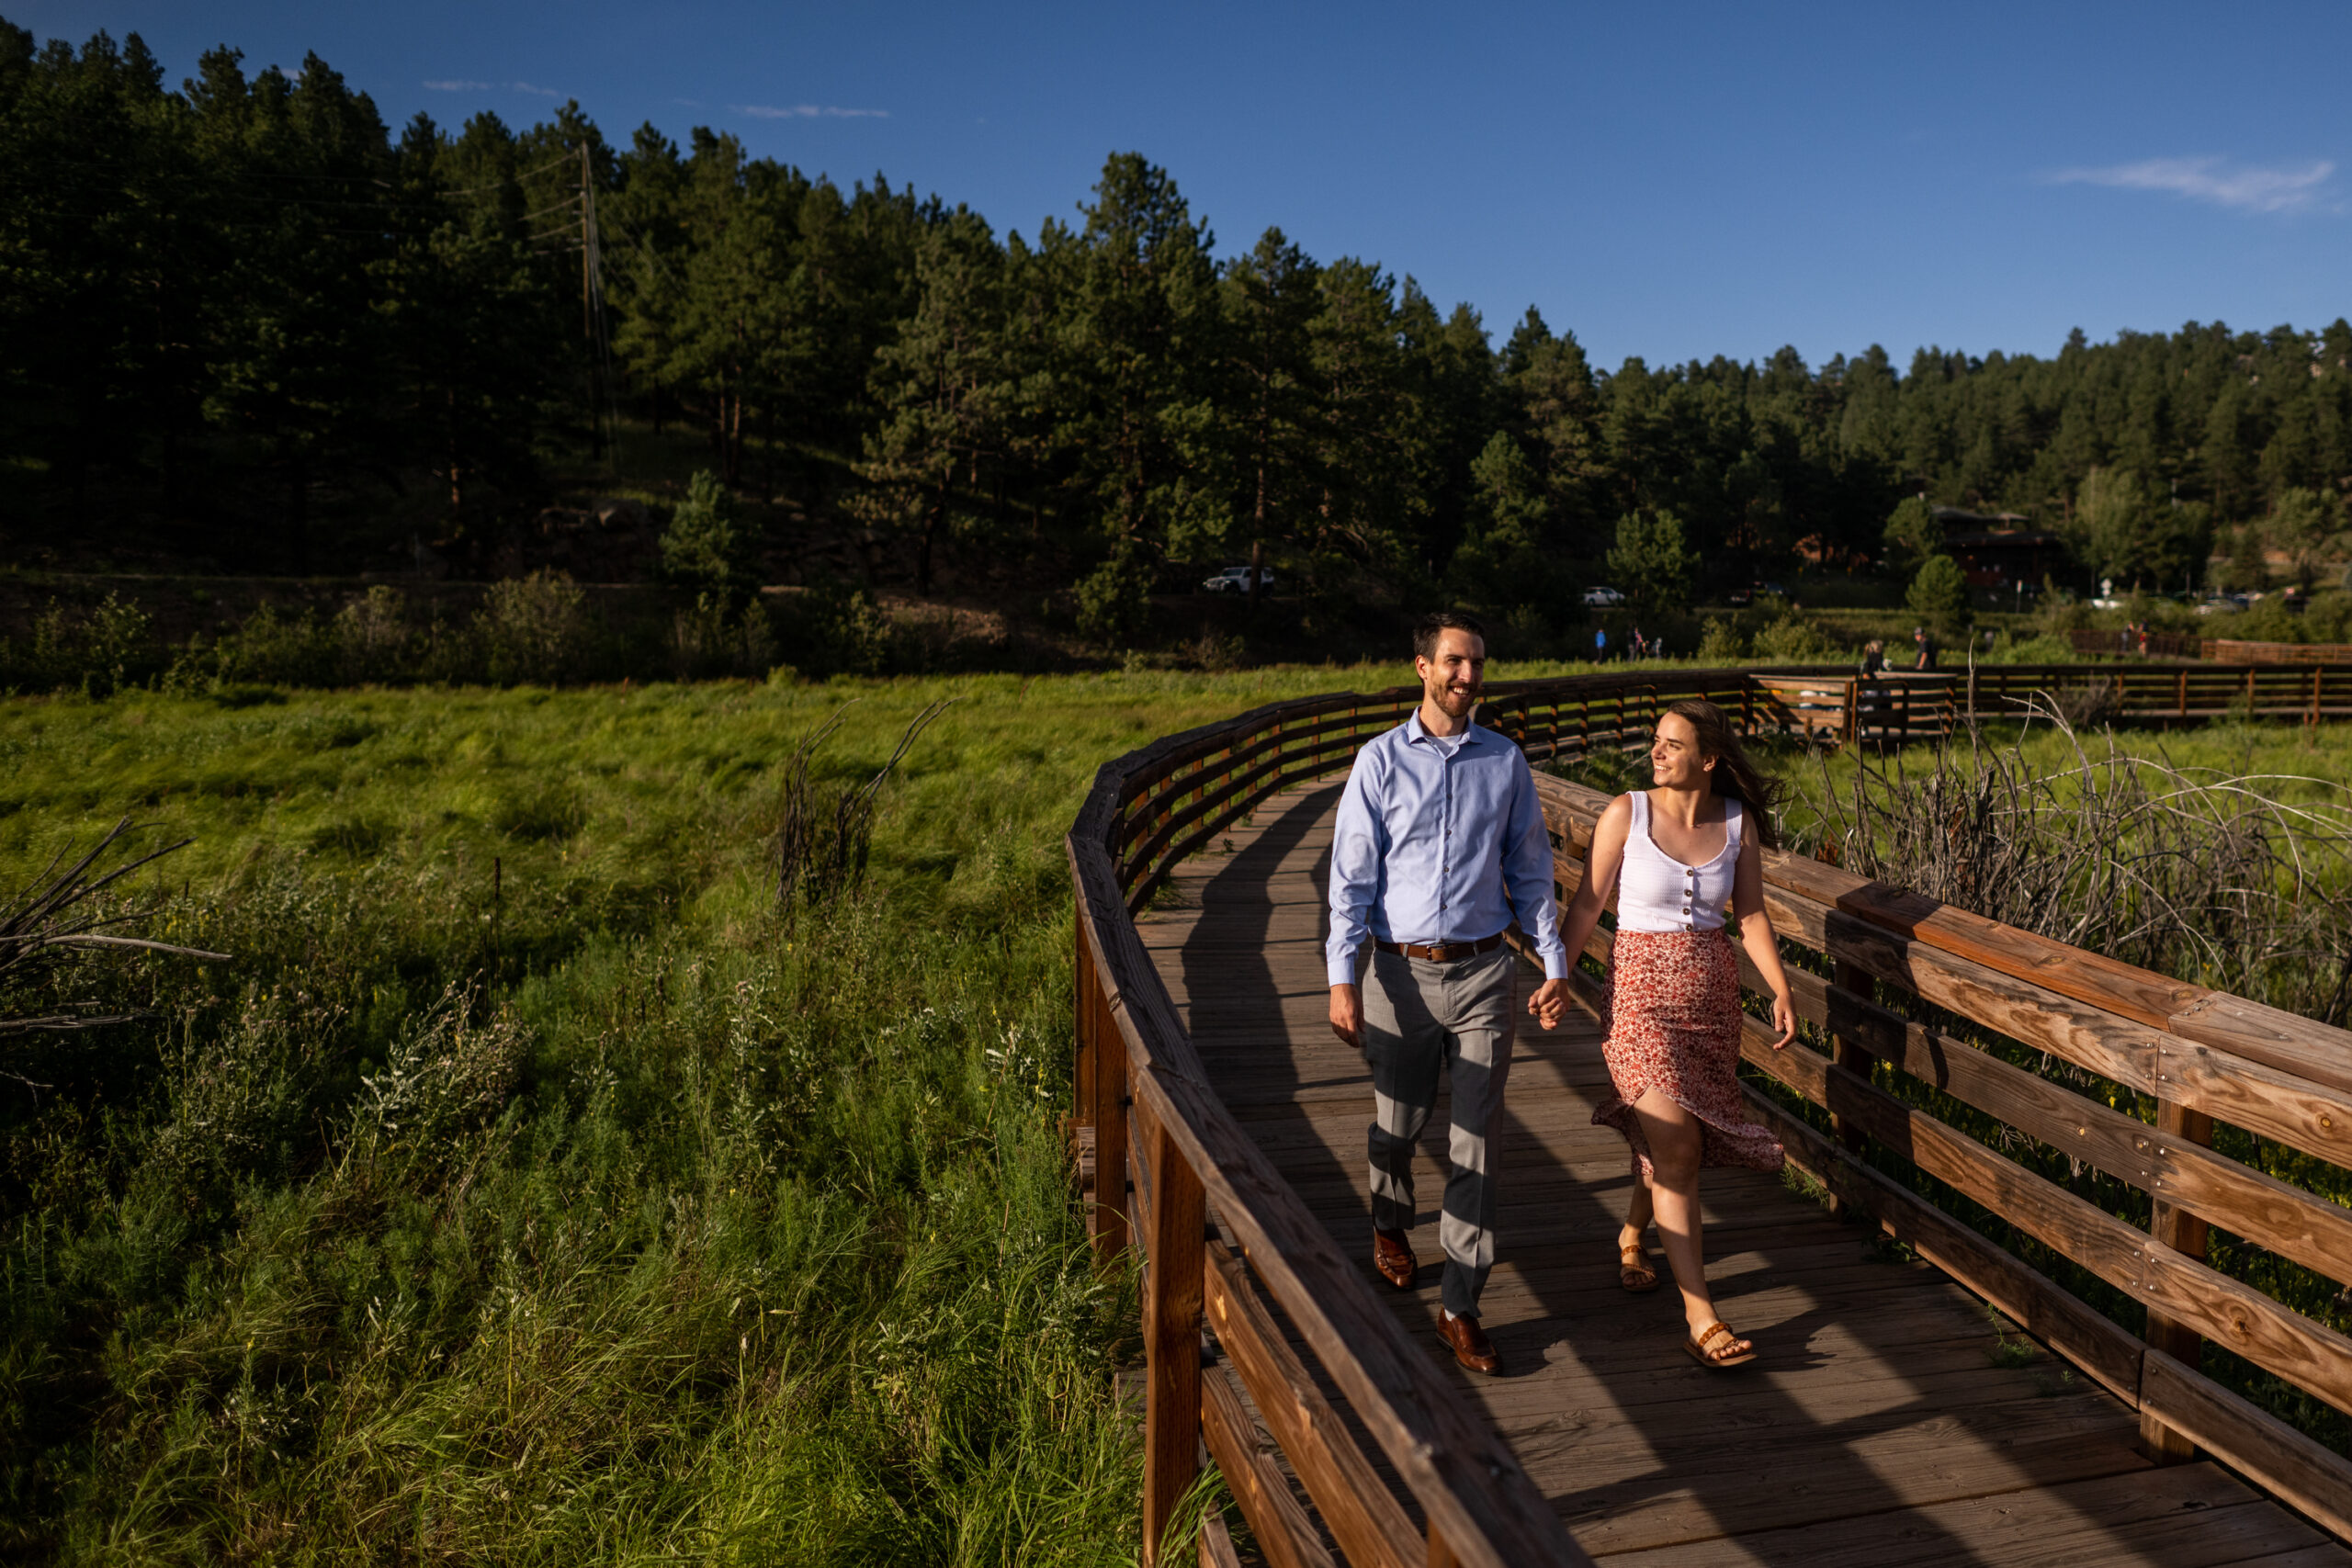 Alice and Joe walk along a boardwalk during an engagement photo shoot at Evergreen Lake in Evergreen, Colorado.